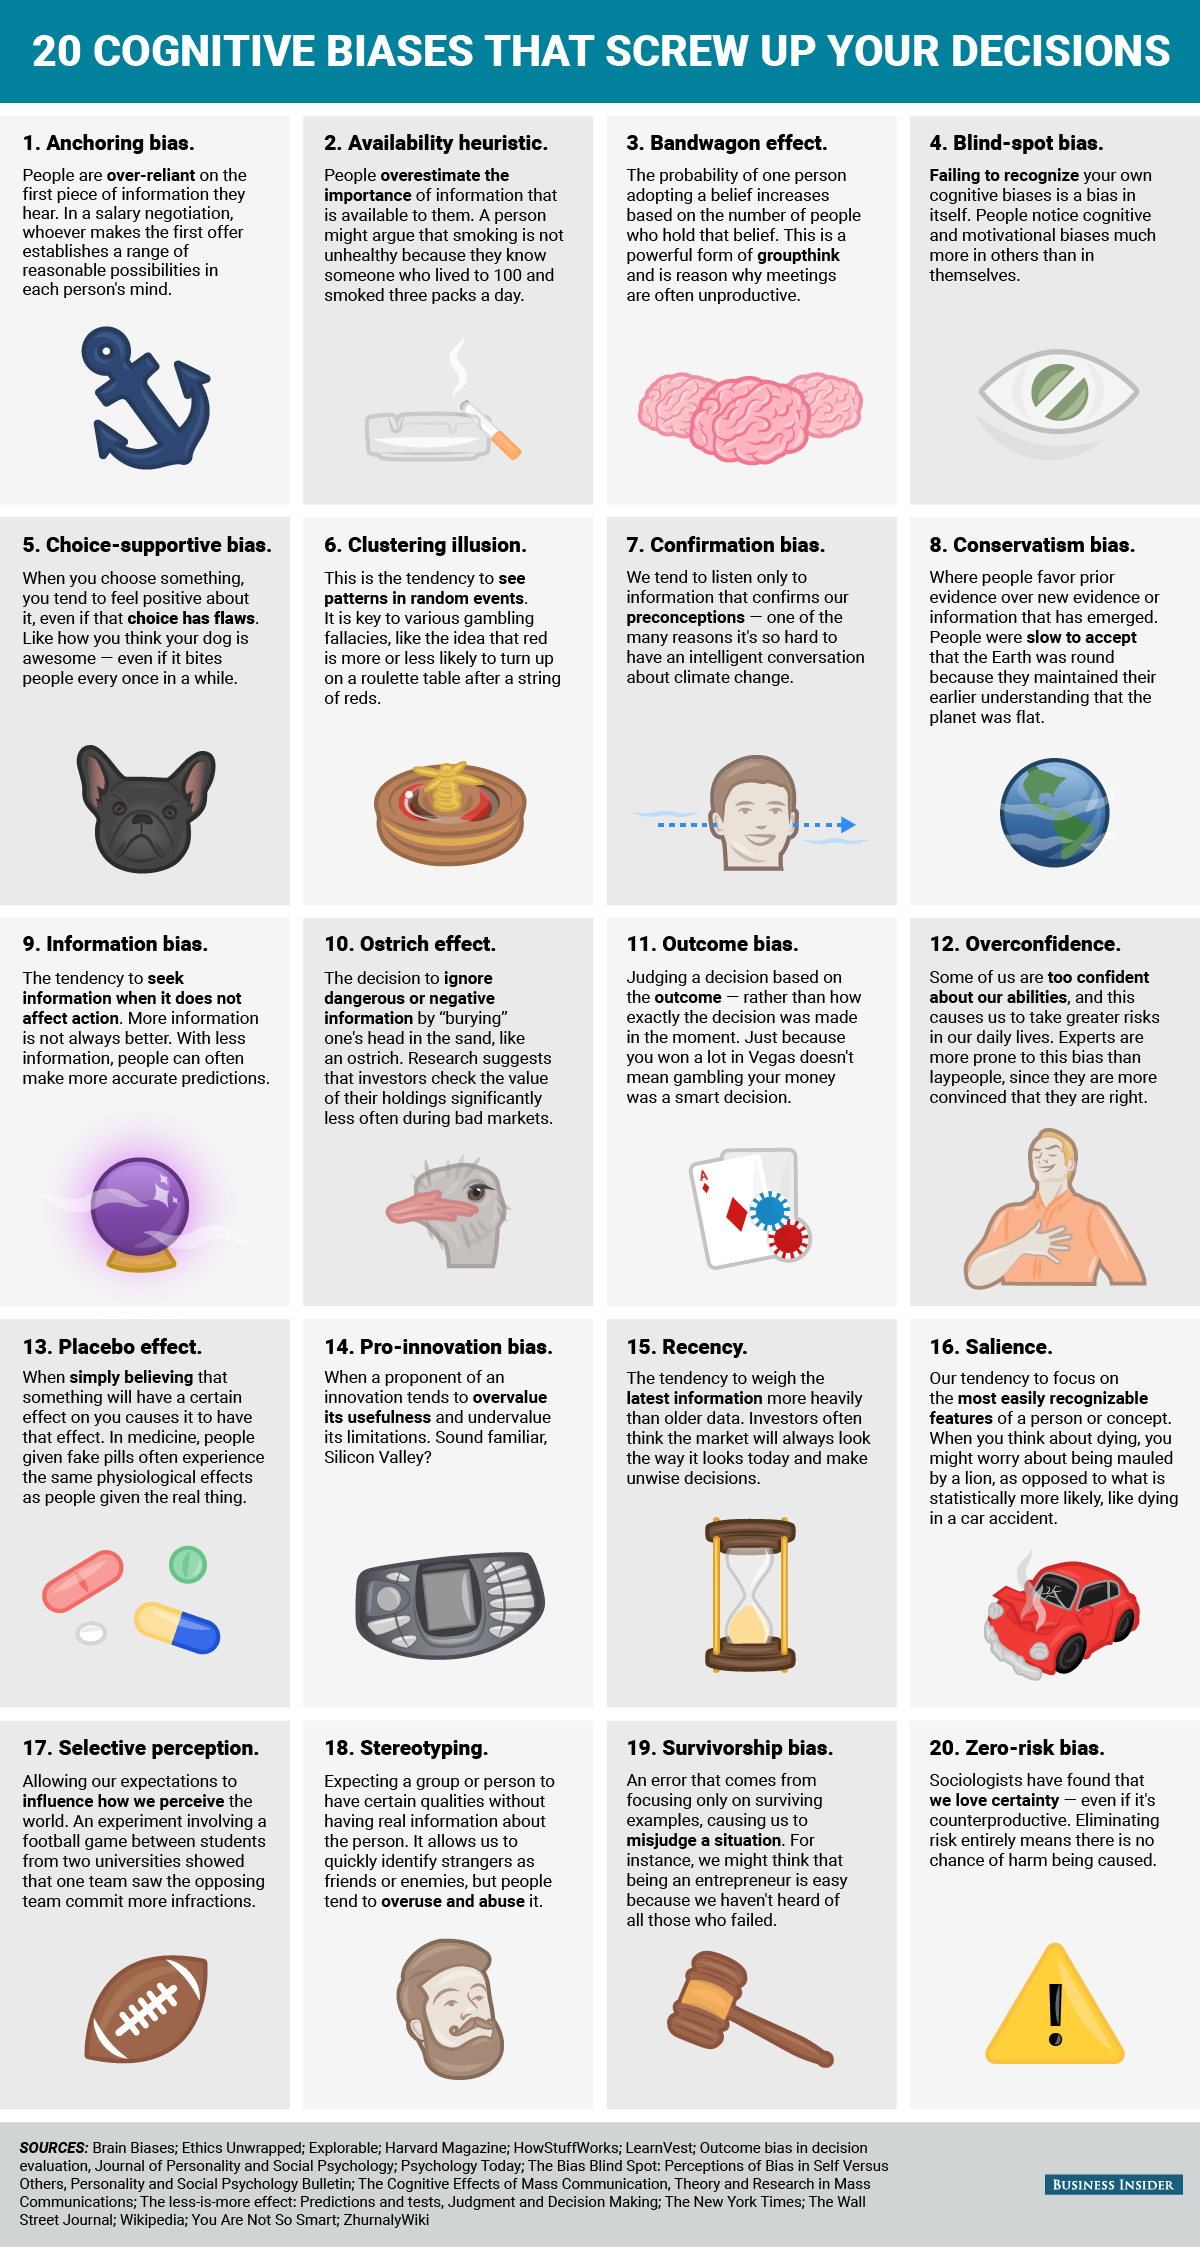 bigraphics20-cognitive-biases-that-screw-up-your-decisions.png